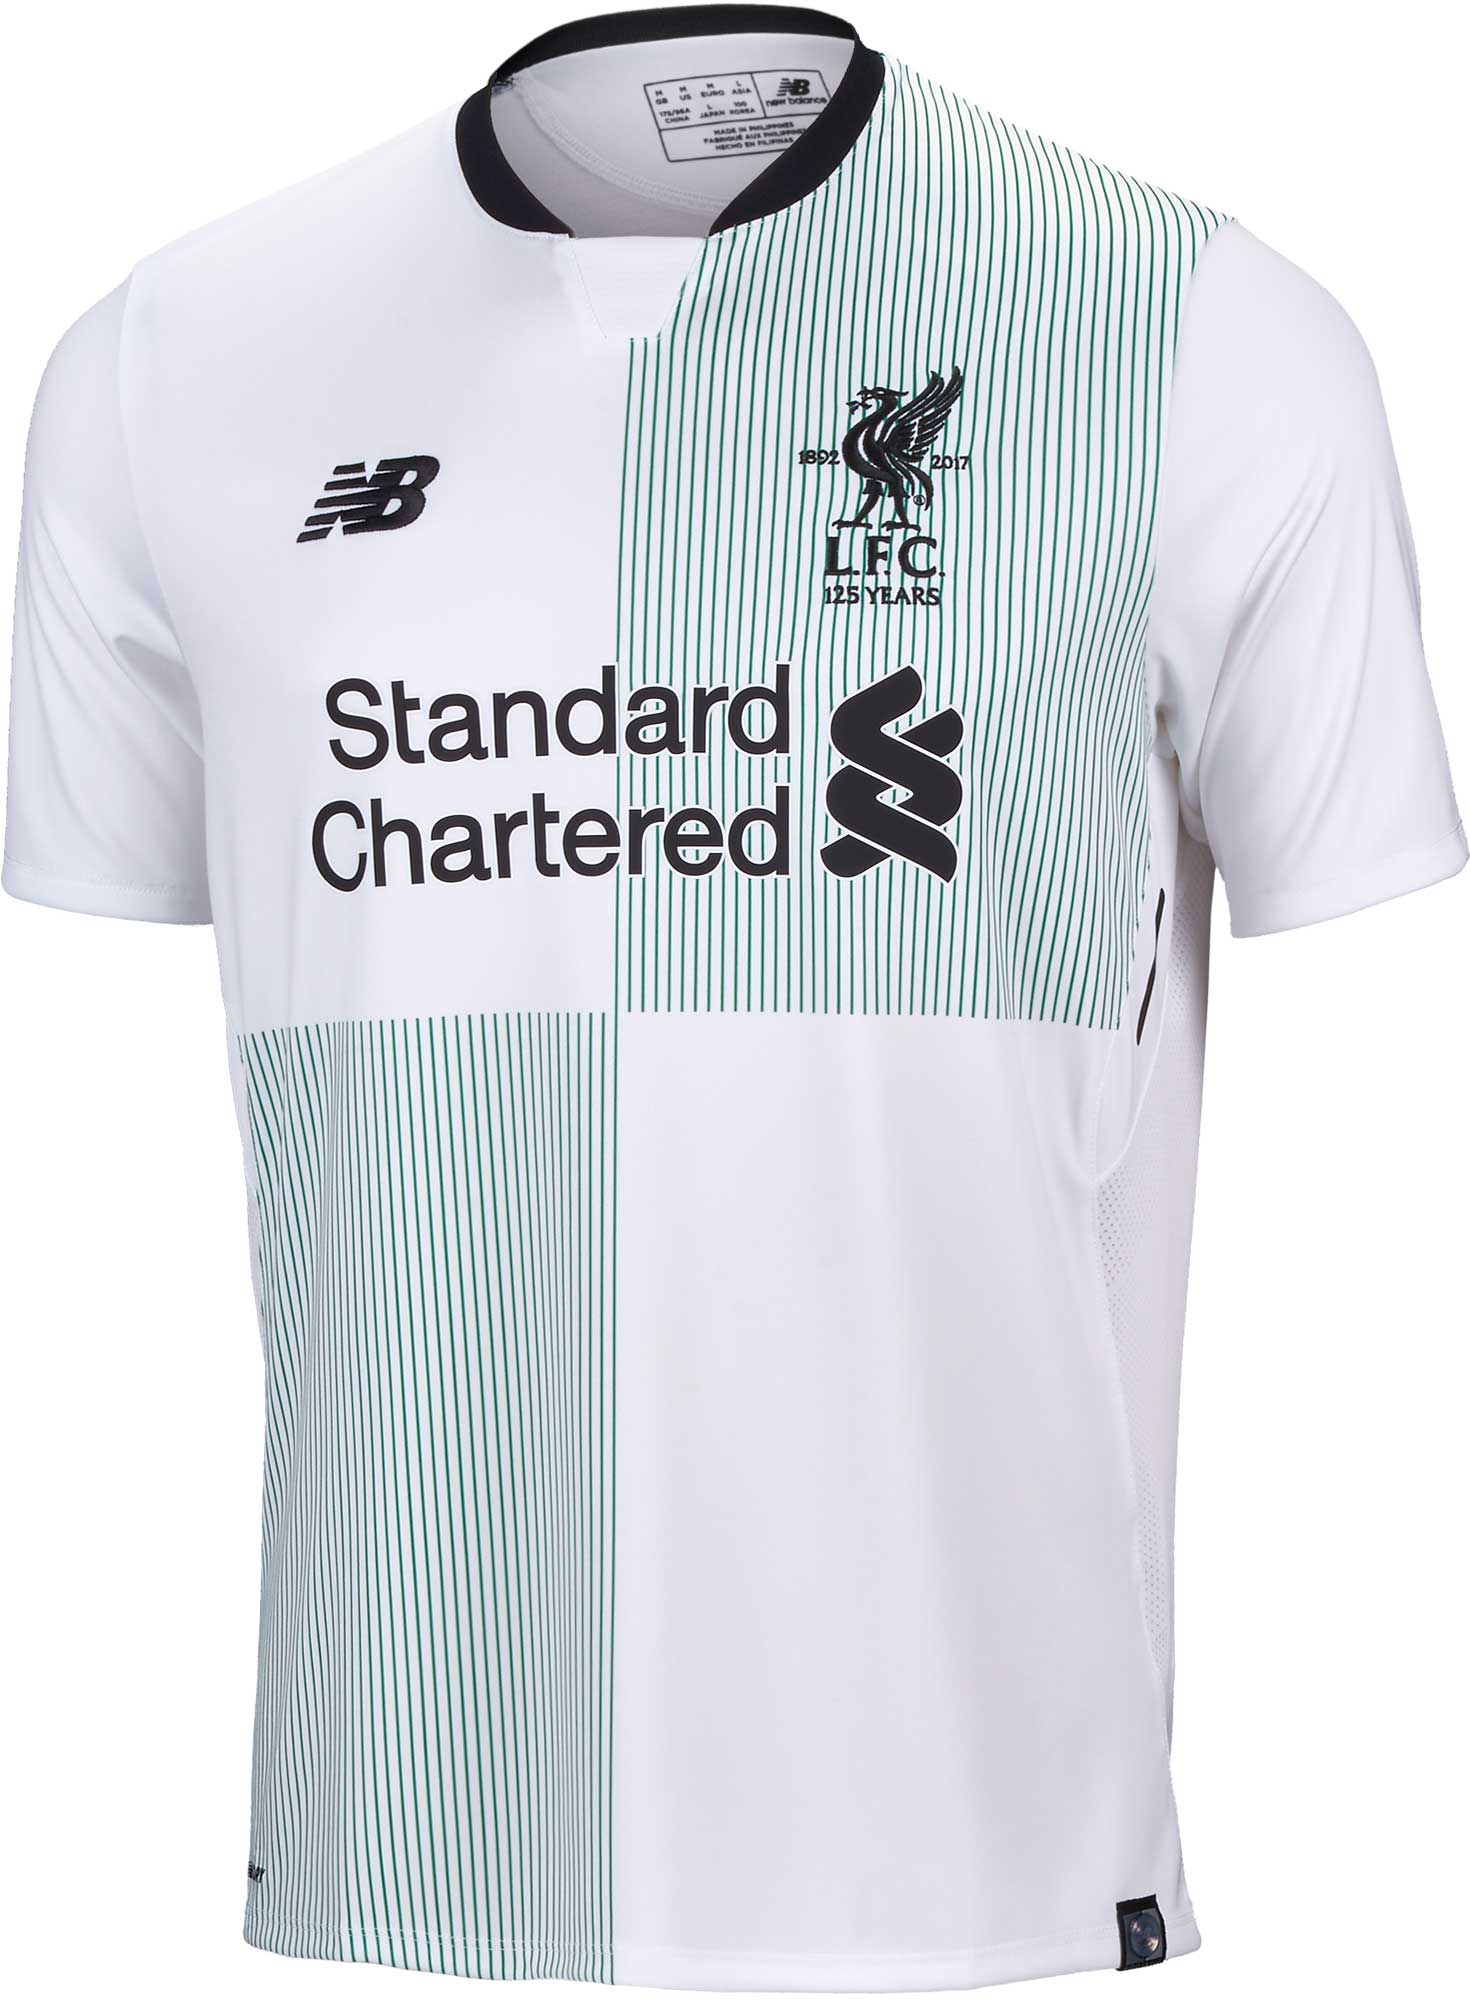 liverpool jersey 125 years